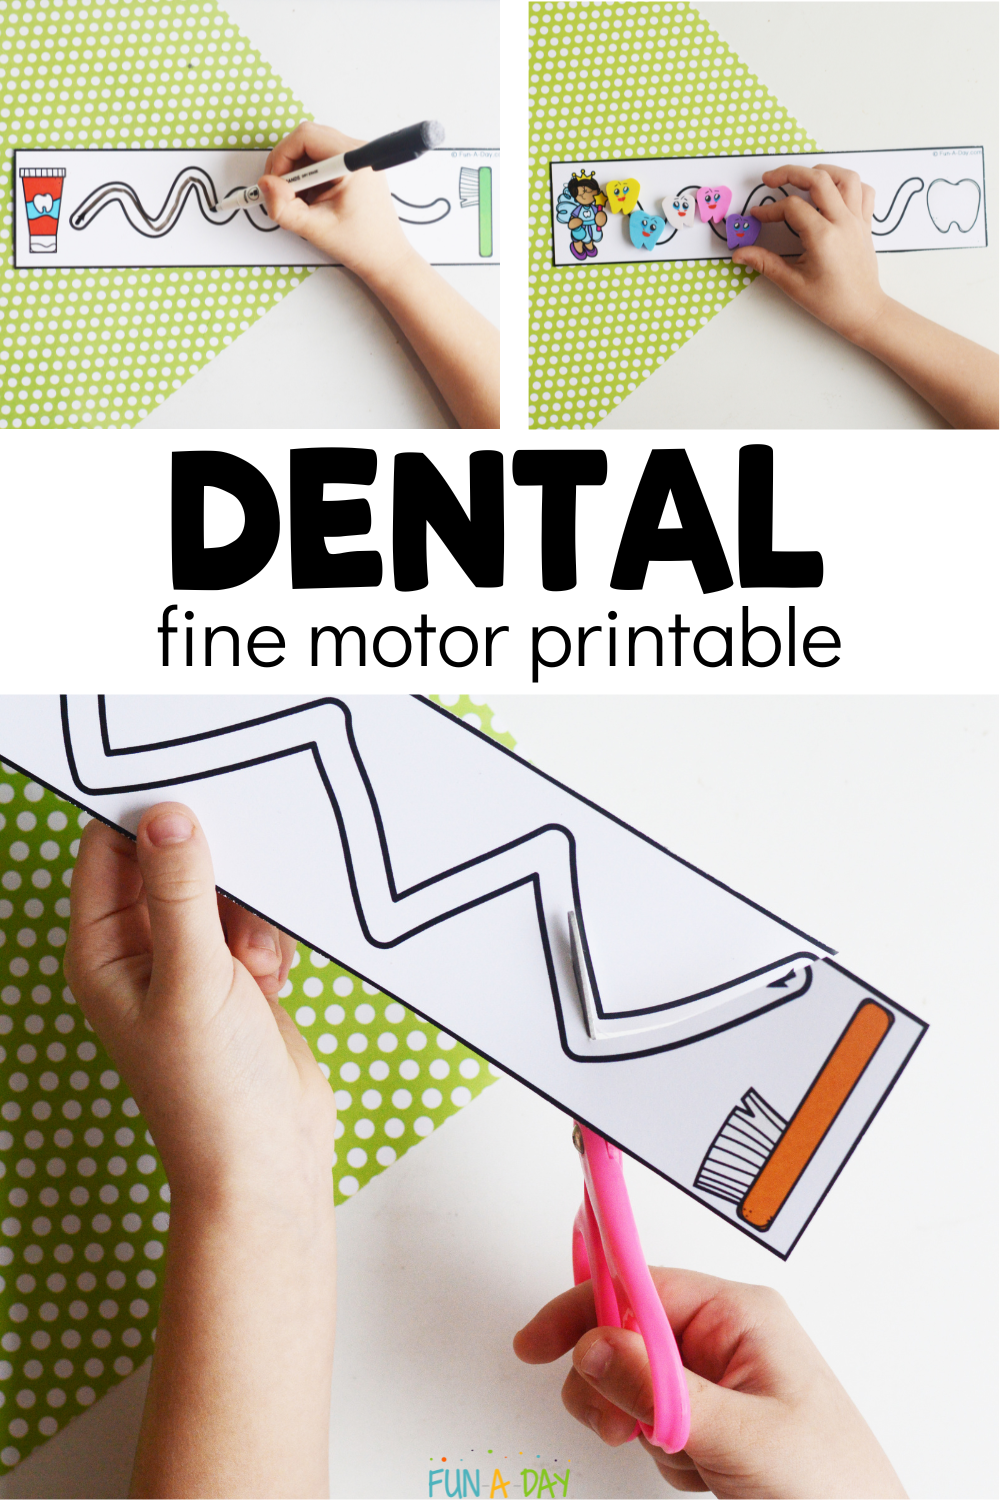 multiple uses of dental cutting strips with text that reads dental fine motor printable